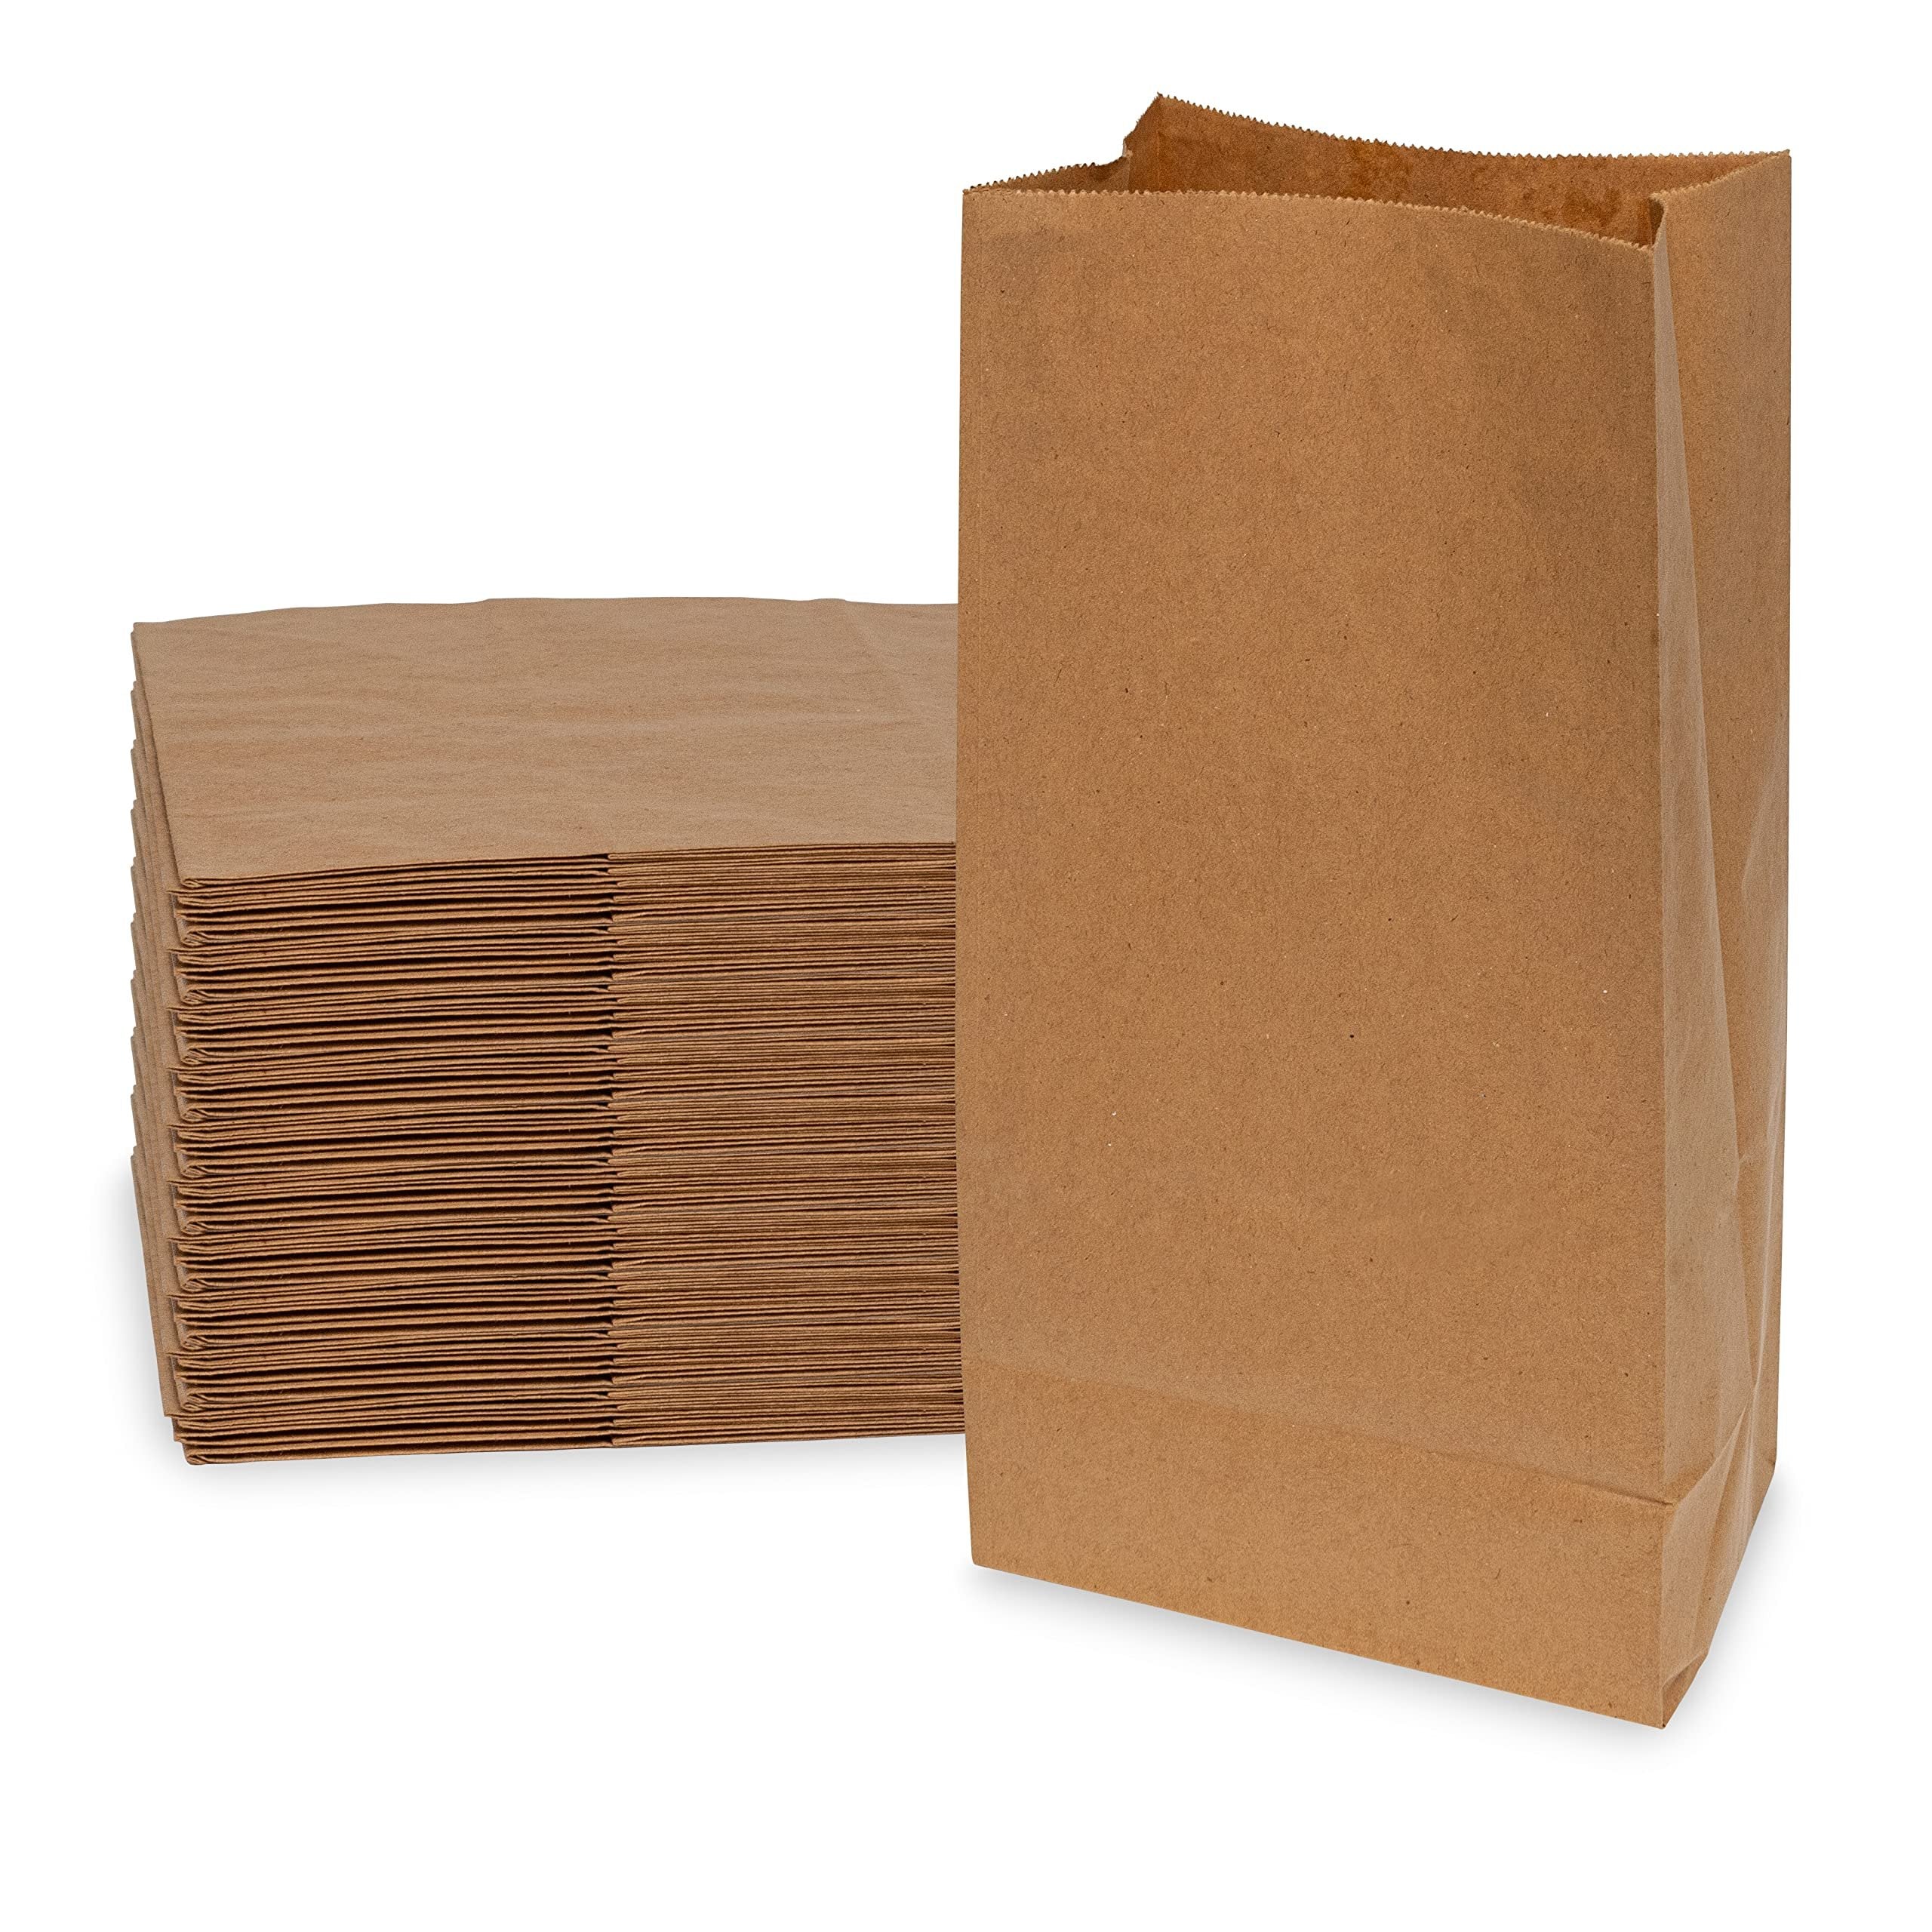 Brown Paper Bags - 12 LB Large Kraft Paper Shopping Bags, SOS Grocery Bags in Bulk for Lunch Bags, Food, Bread Bags, Delivery & Take Out, Deli, Bakery, Grocery and Convenience Store Use - 7x4.5x13.75